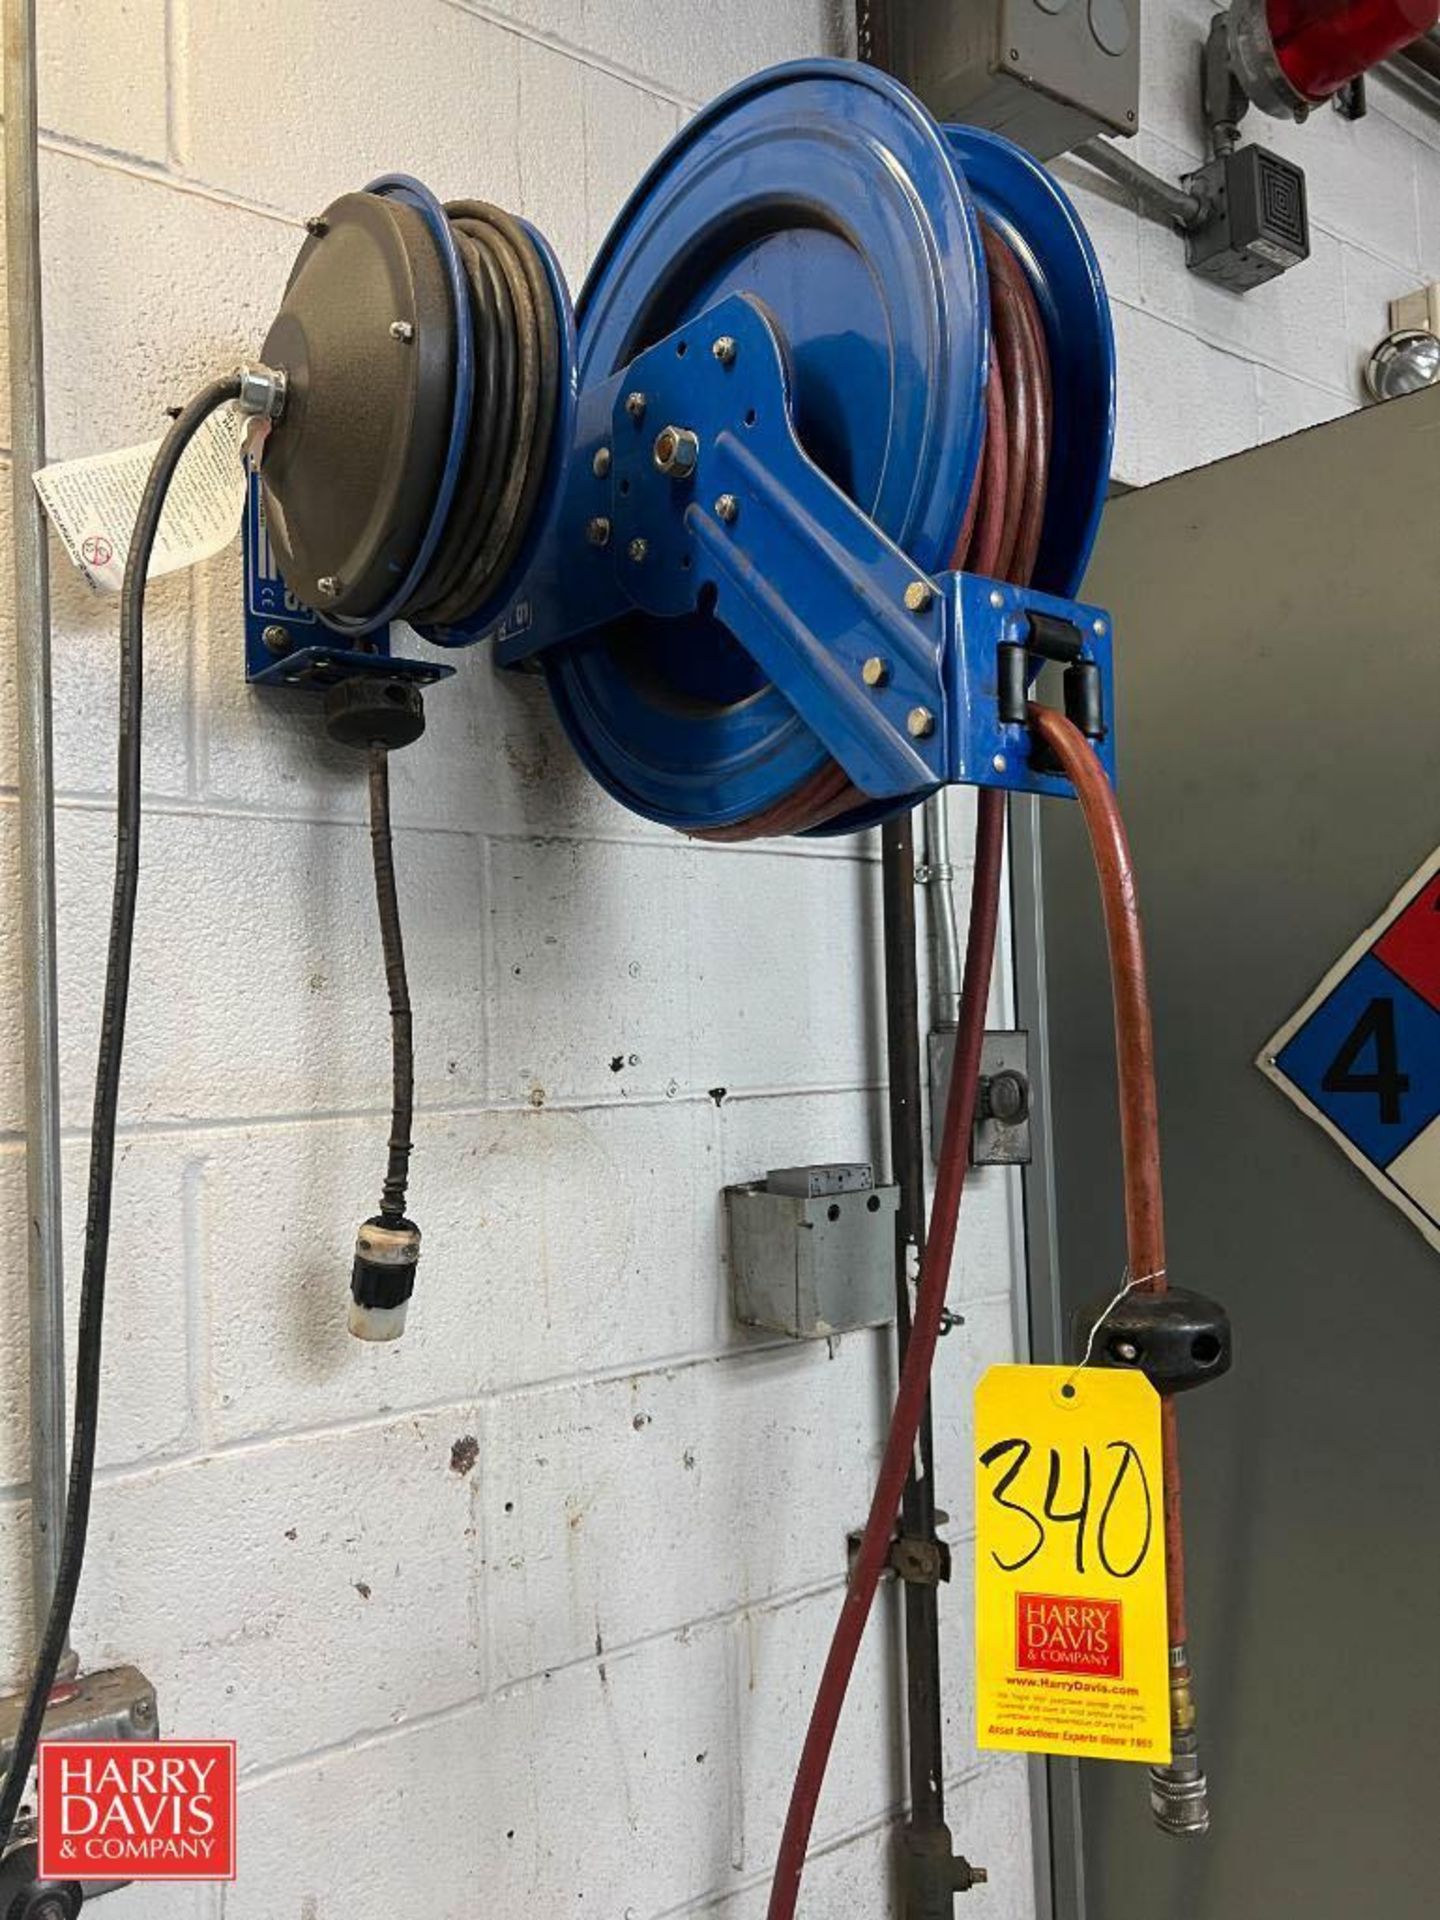 (2) Coxreels Hose Reals with Air Hose and Nozzle - Rigging Fee: $150